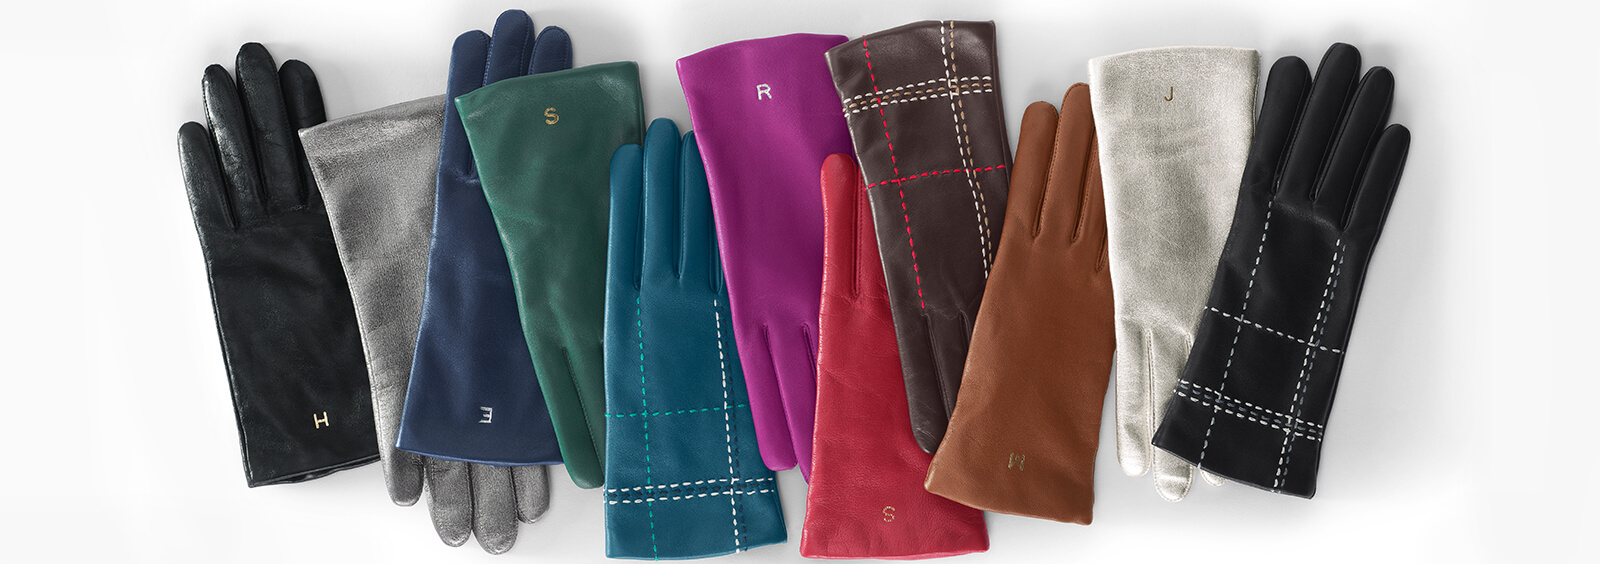 8 Options for Keeping Your Hands Warm This Winter